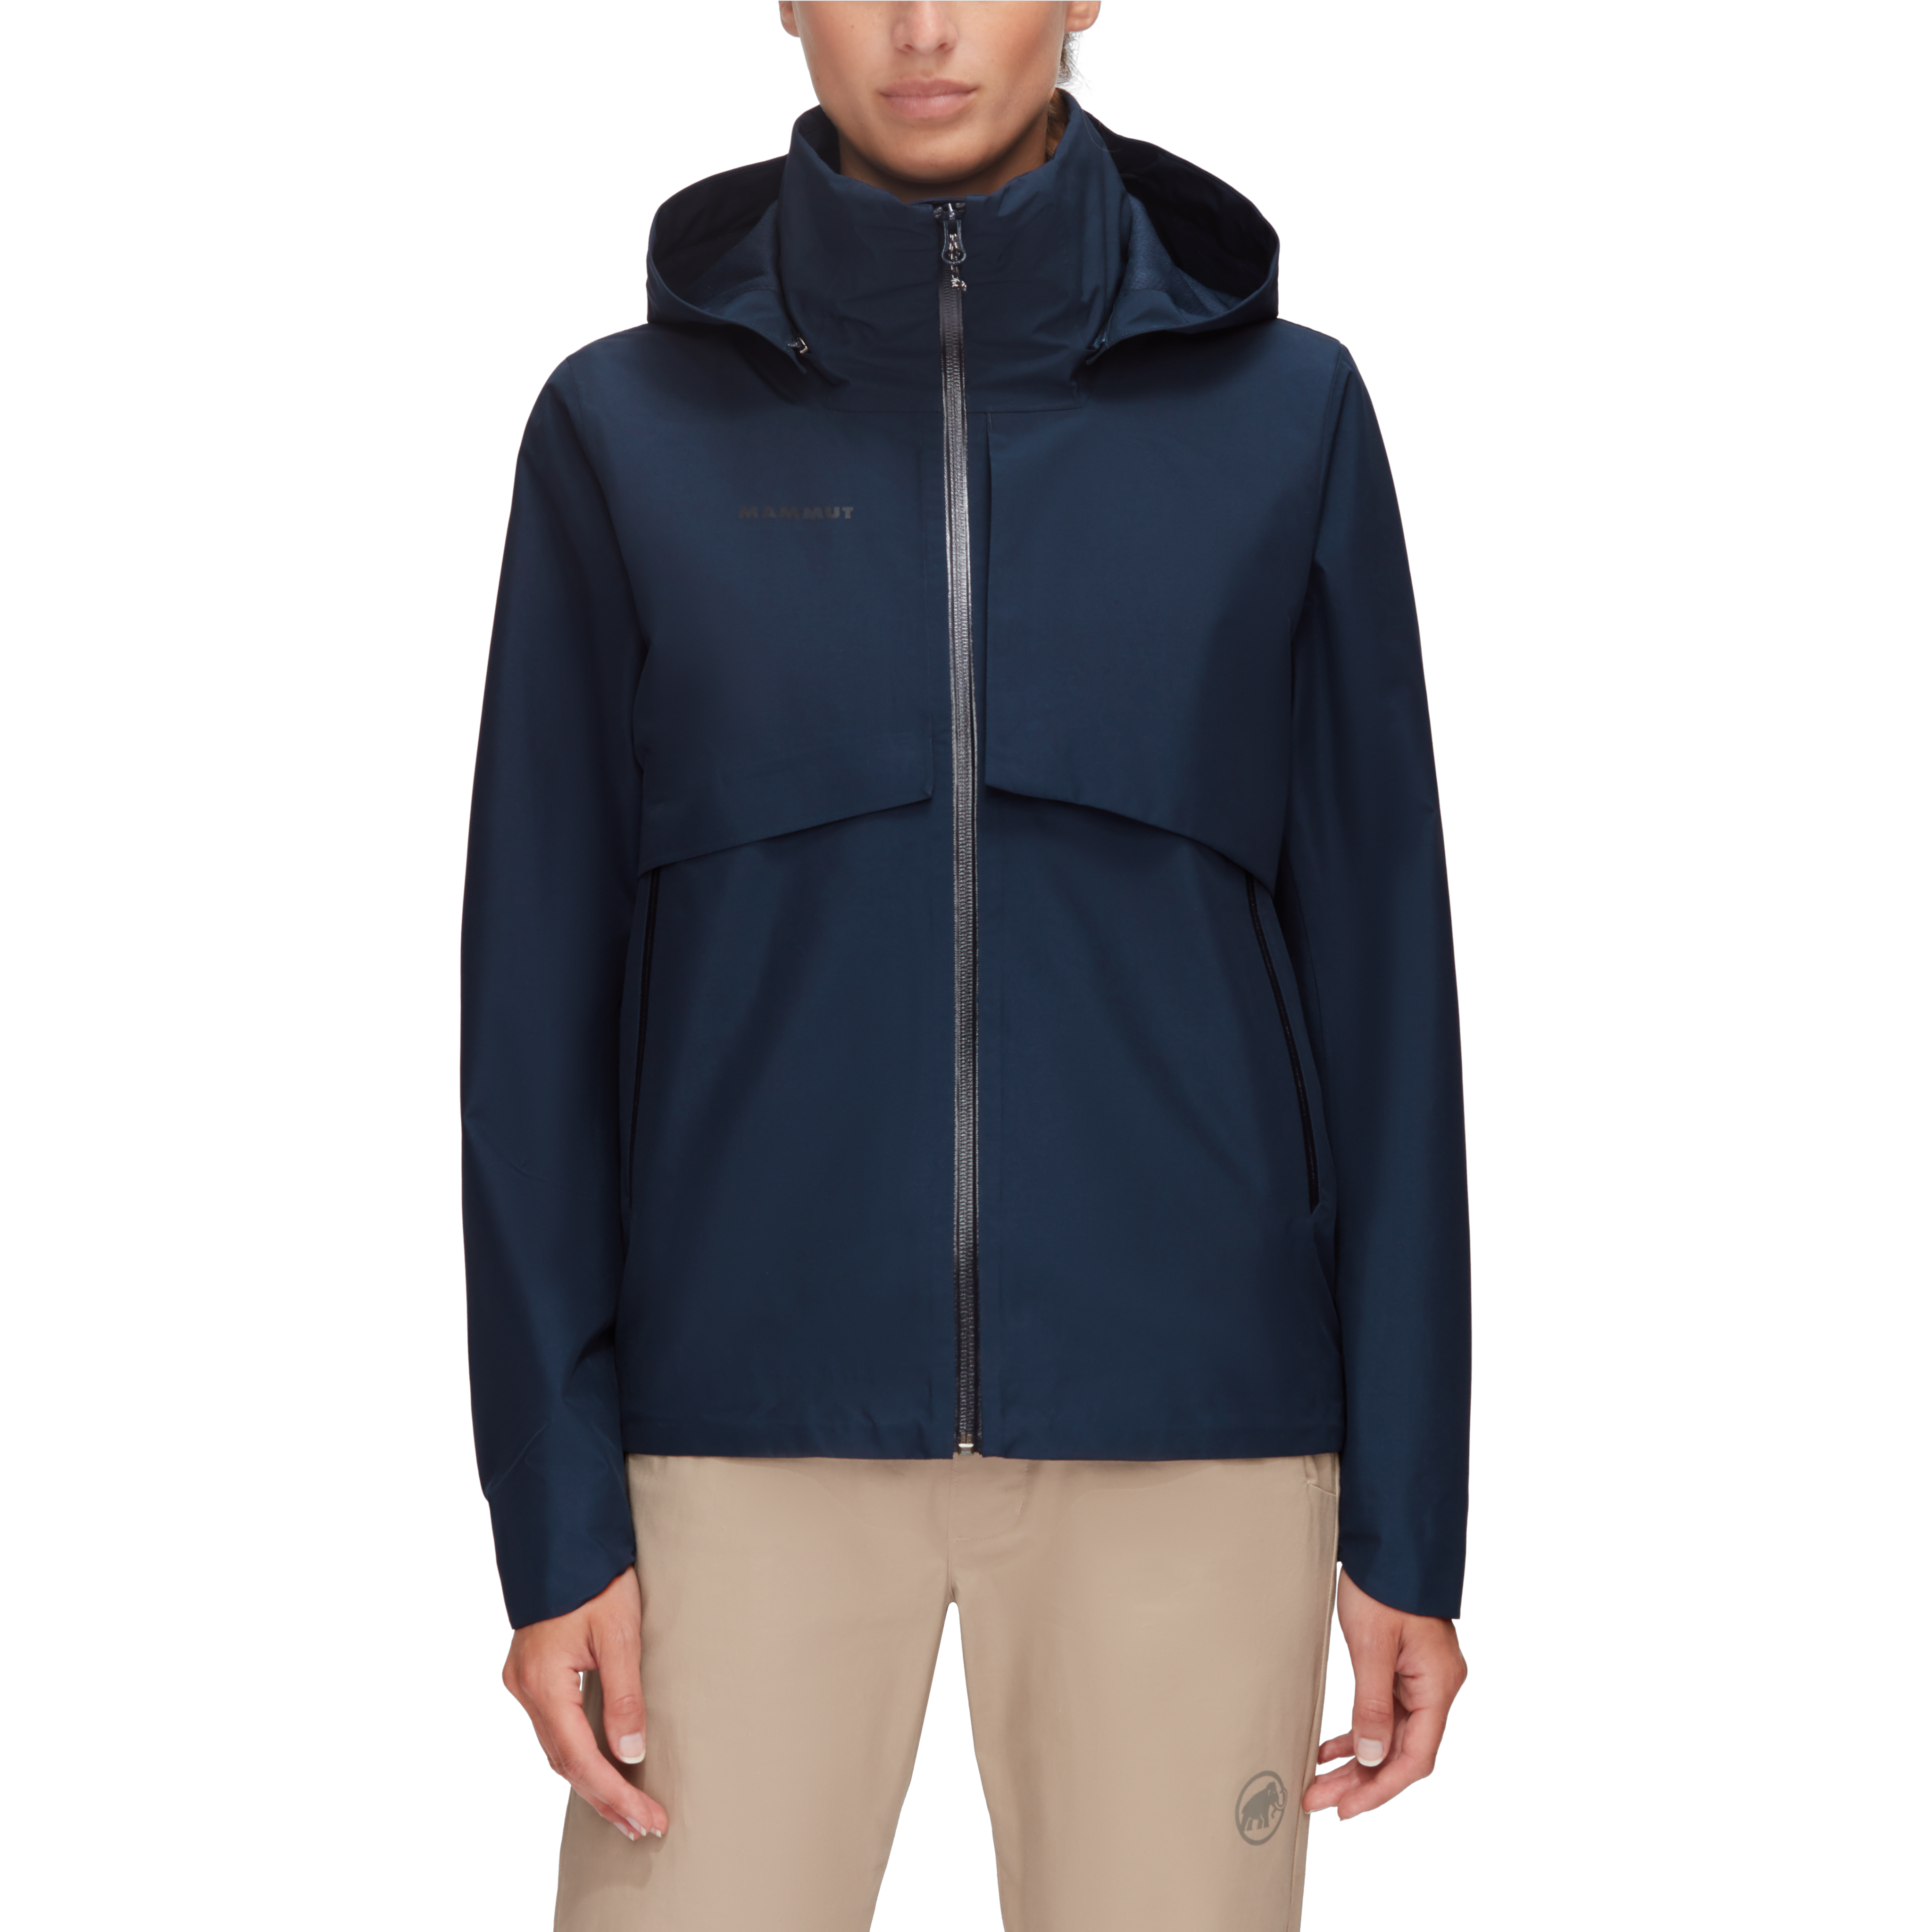 Seon 2L HS Hooded Jacket Women product image